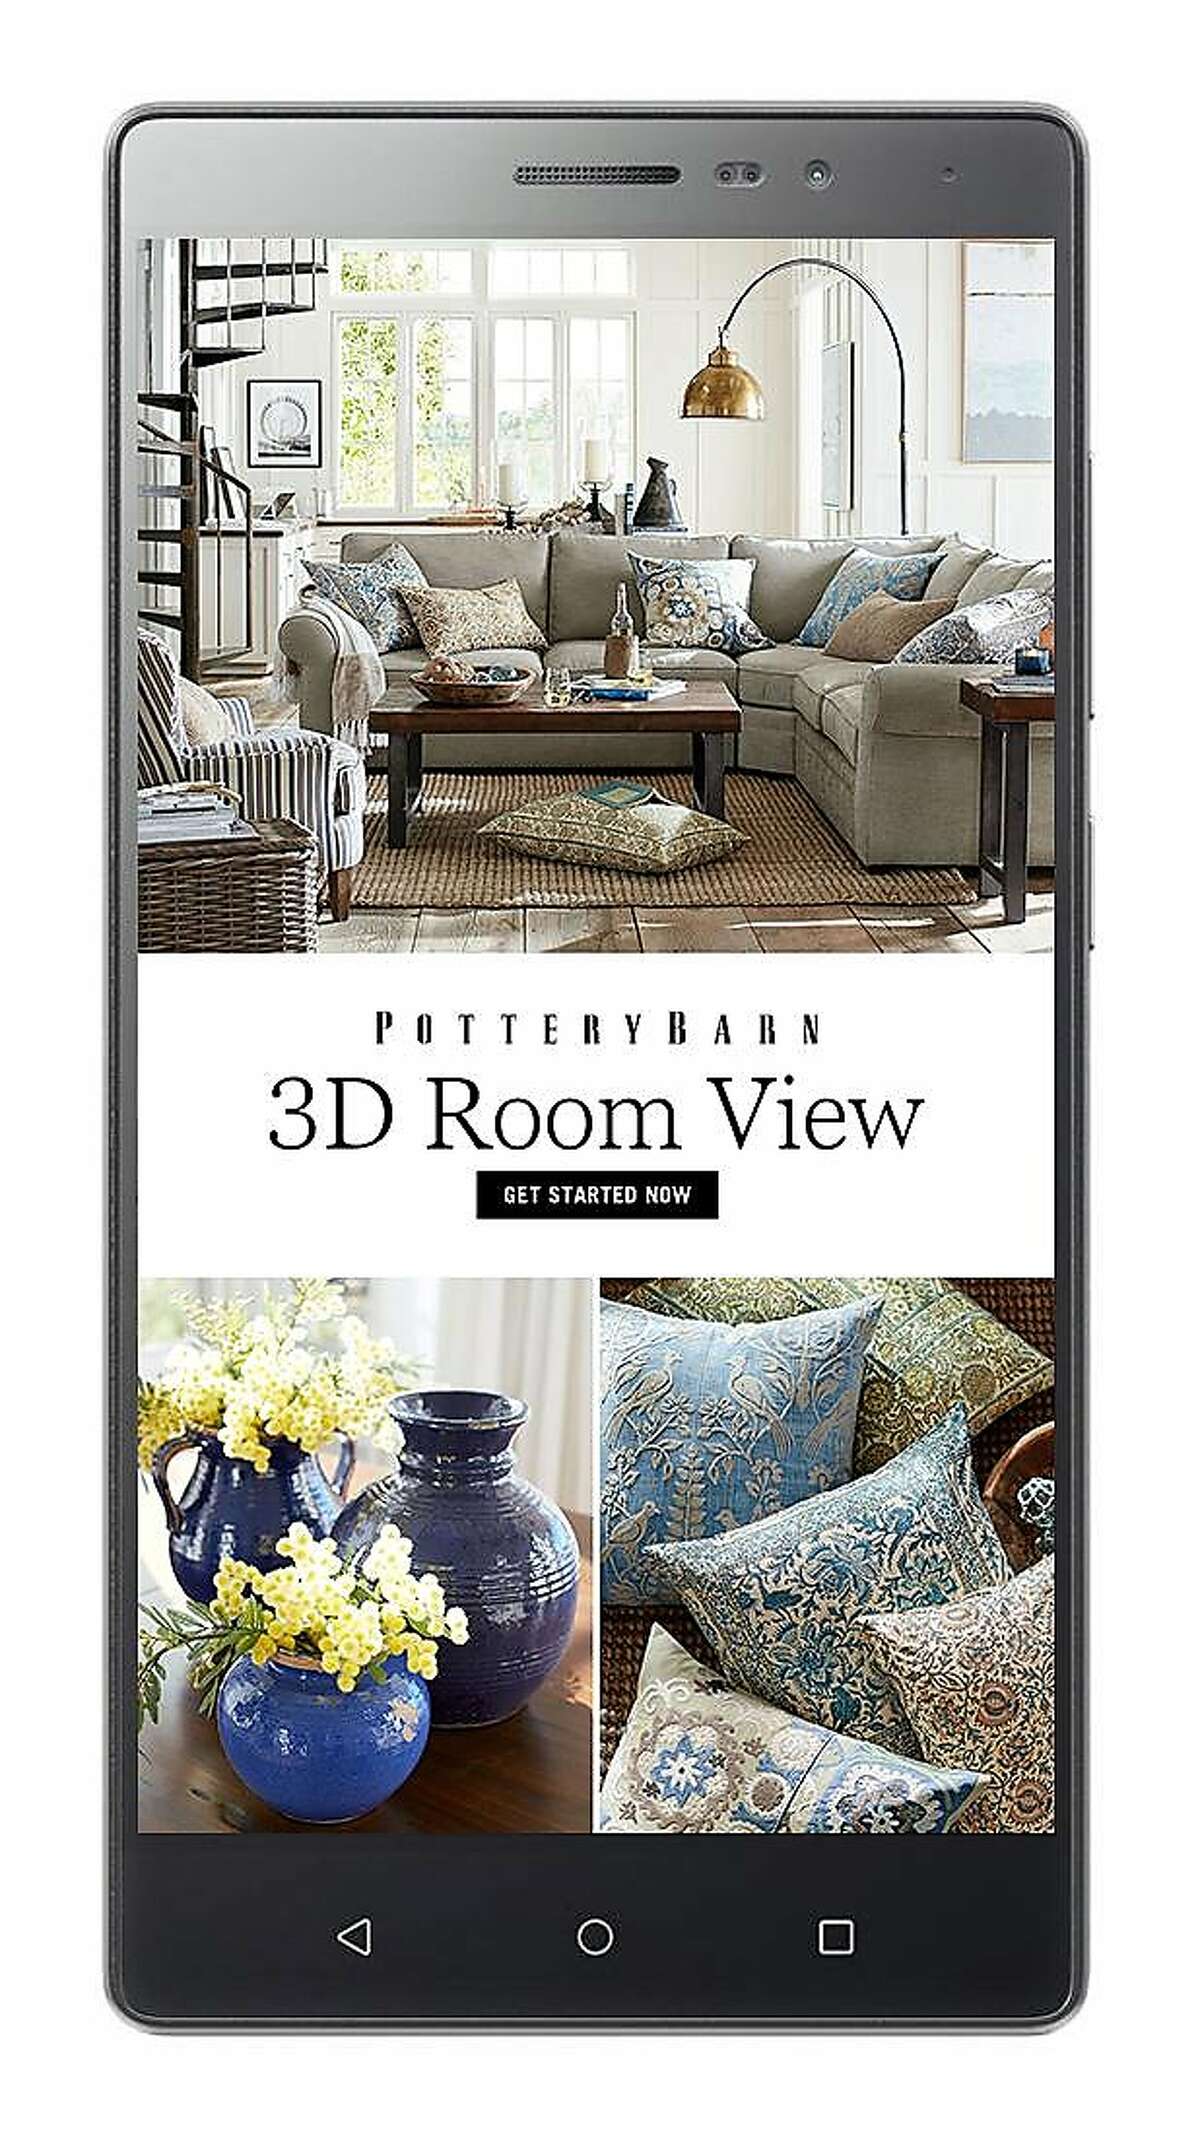 360 Room View of Pottery Barn's online catalog.